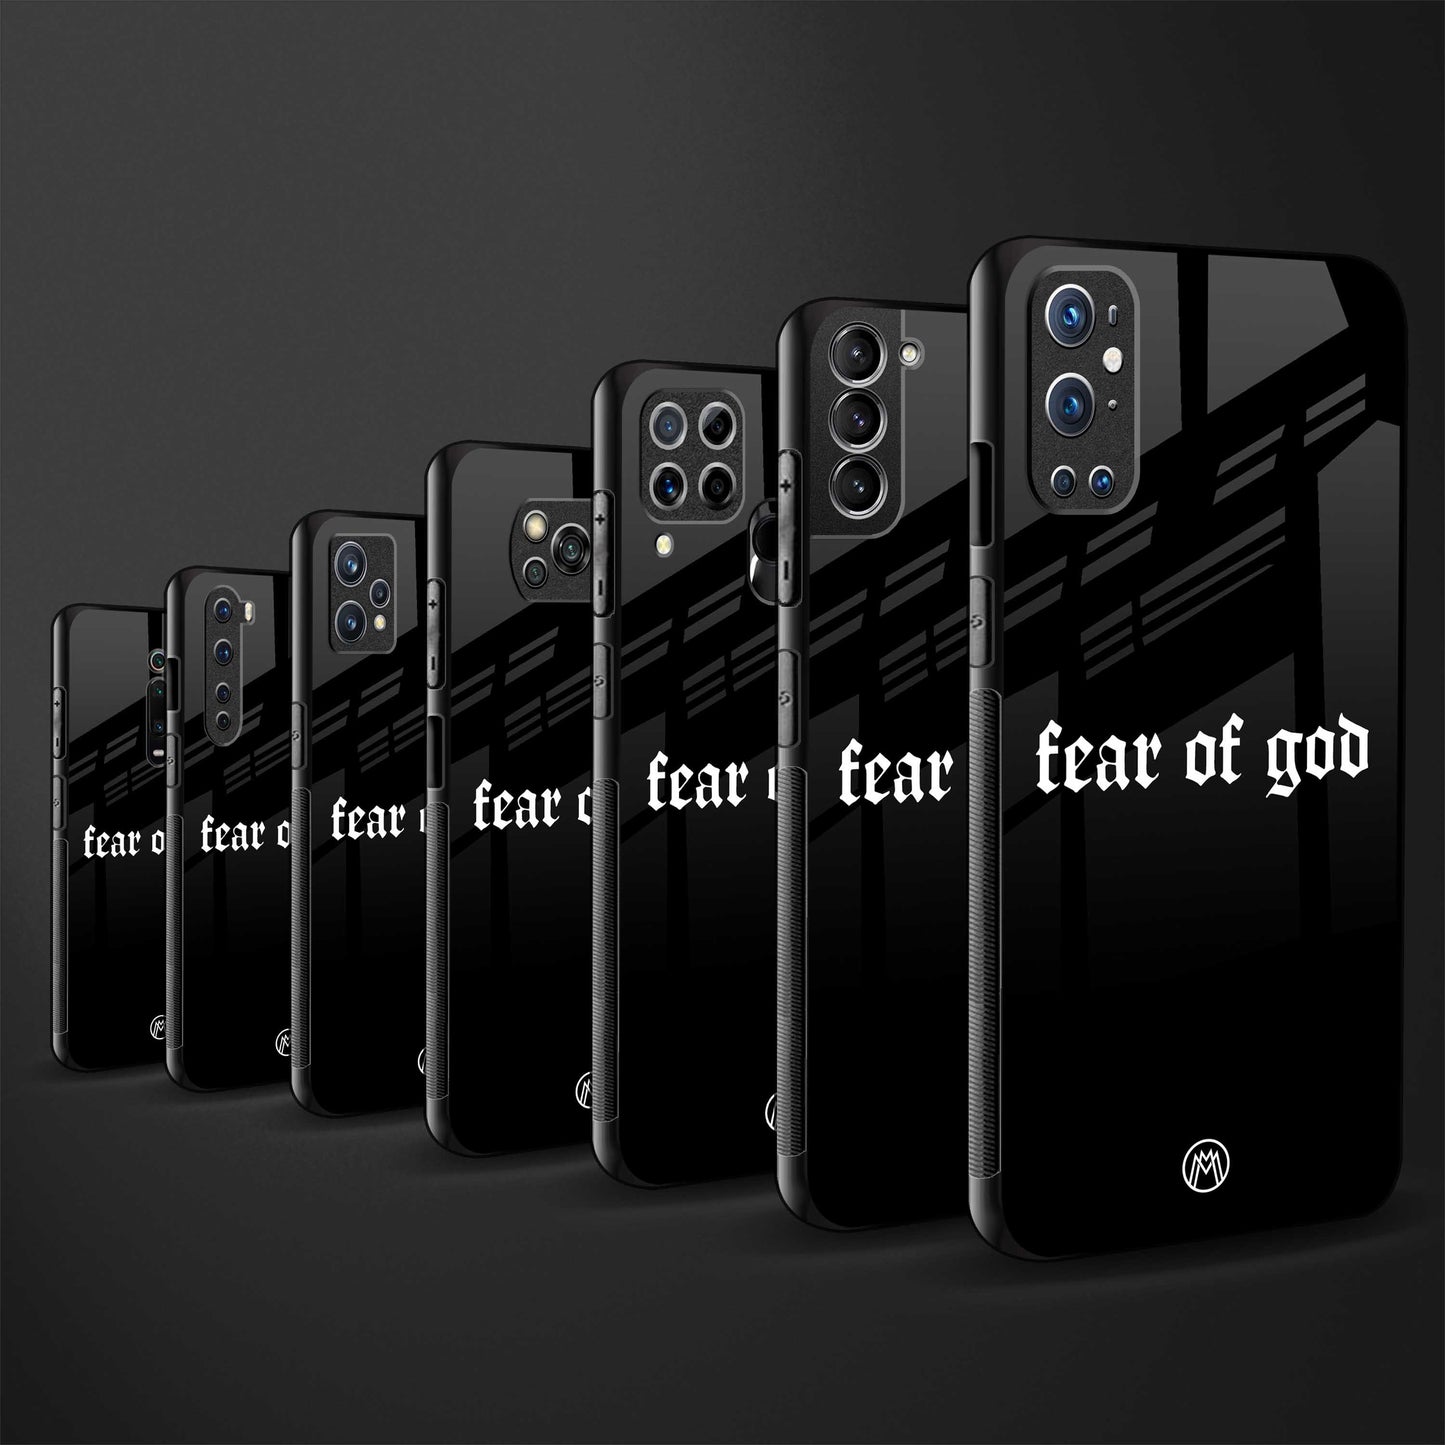 fear of god phone cover for samsung galaxy s20